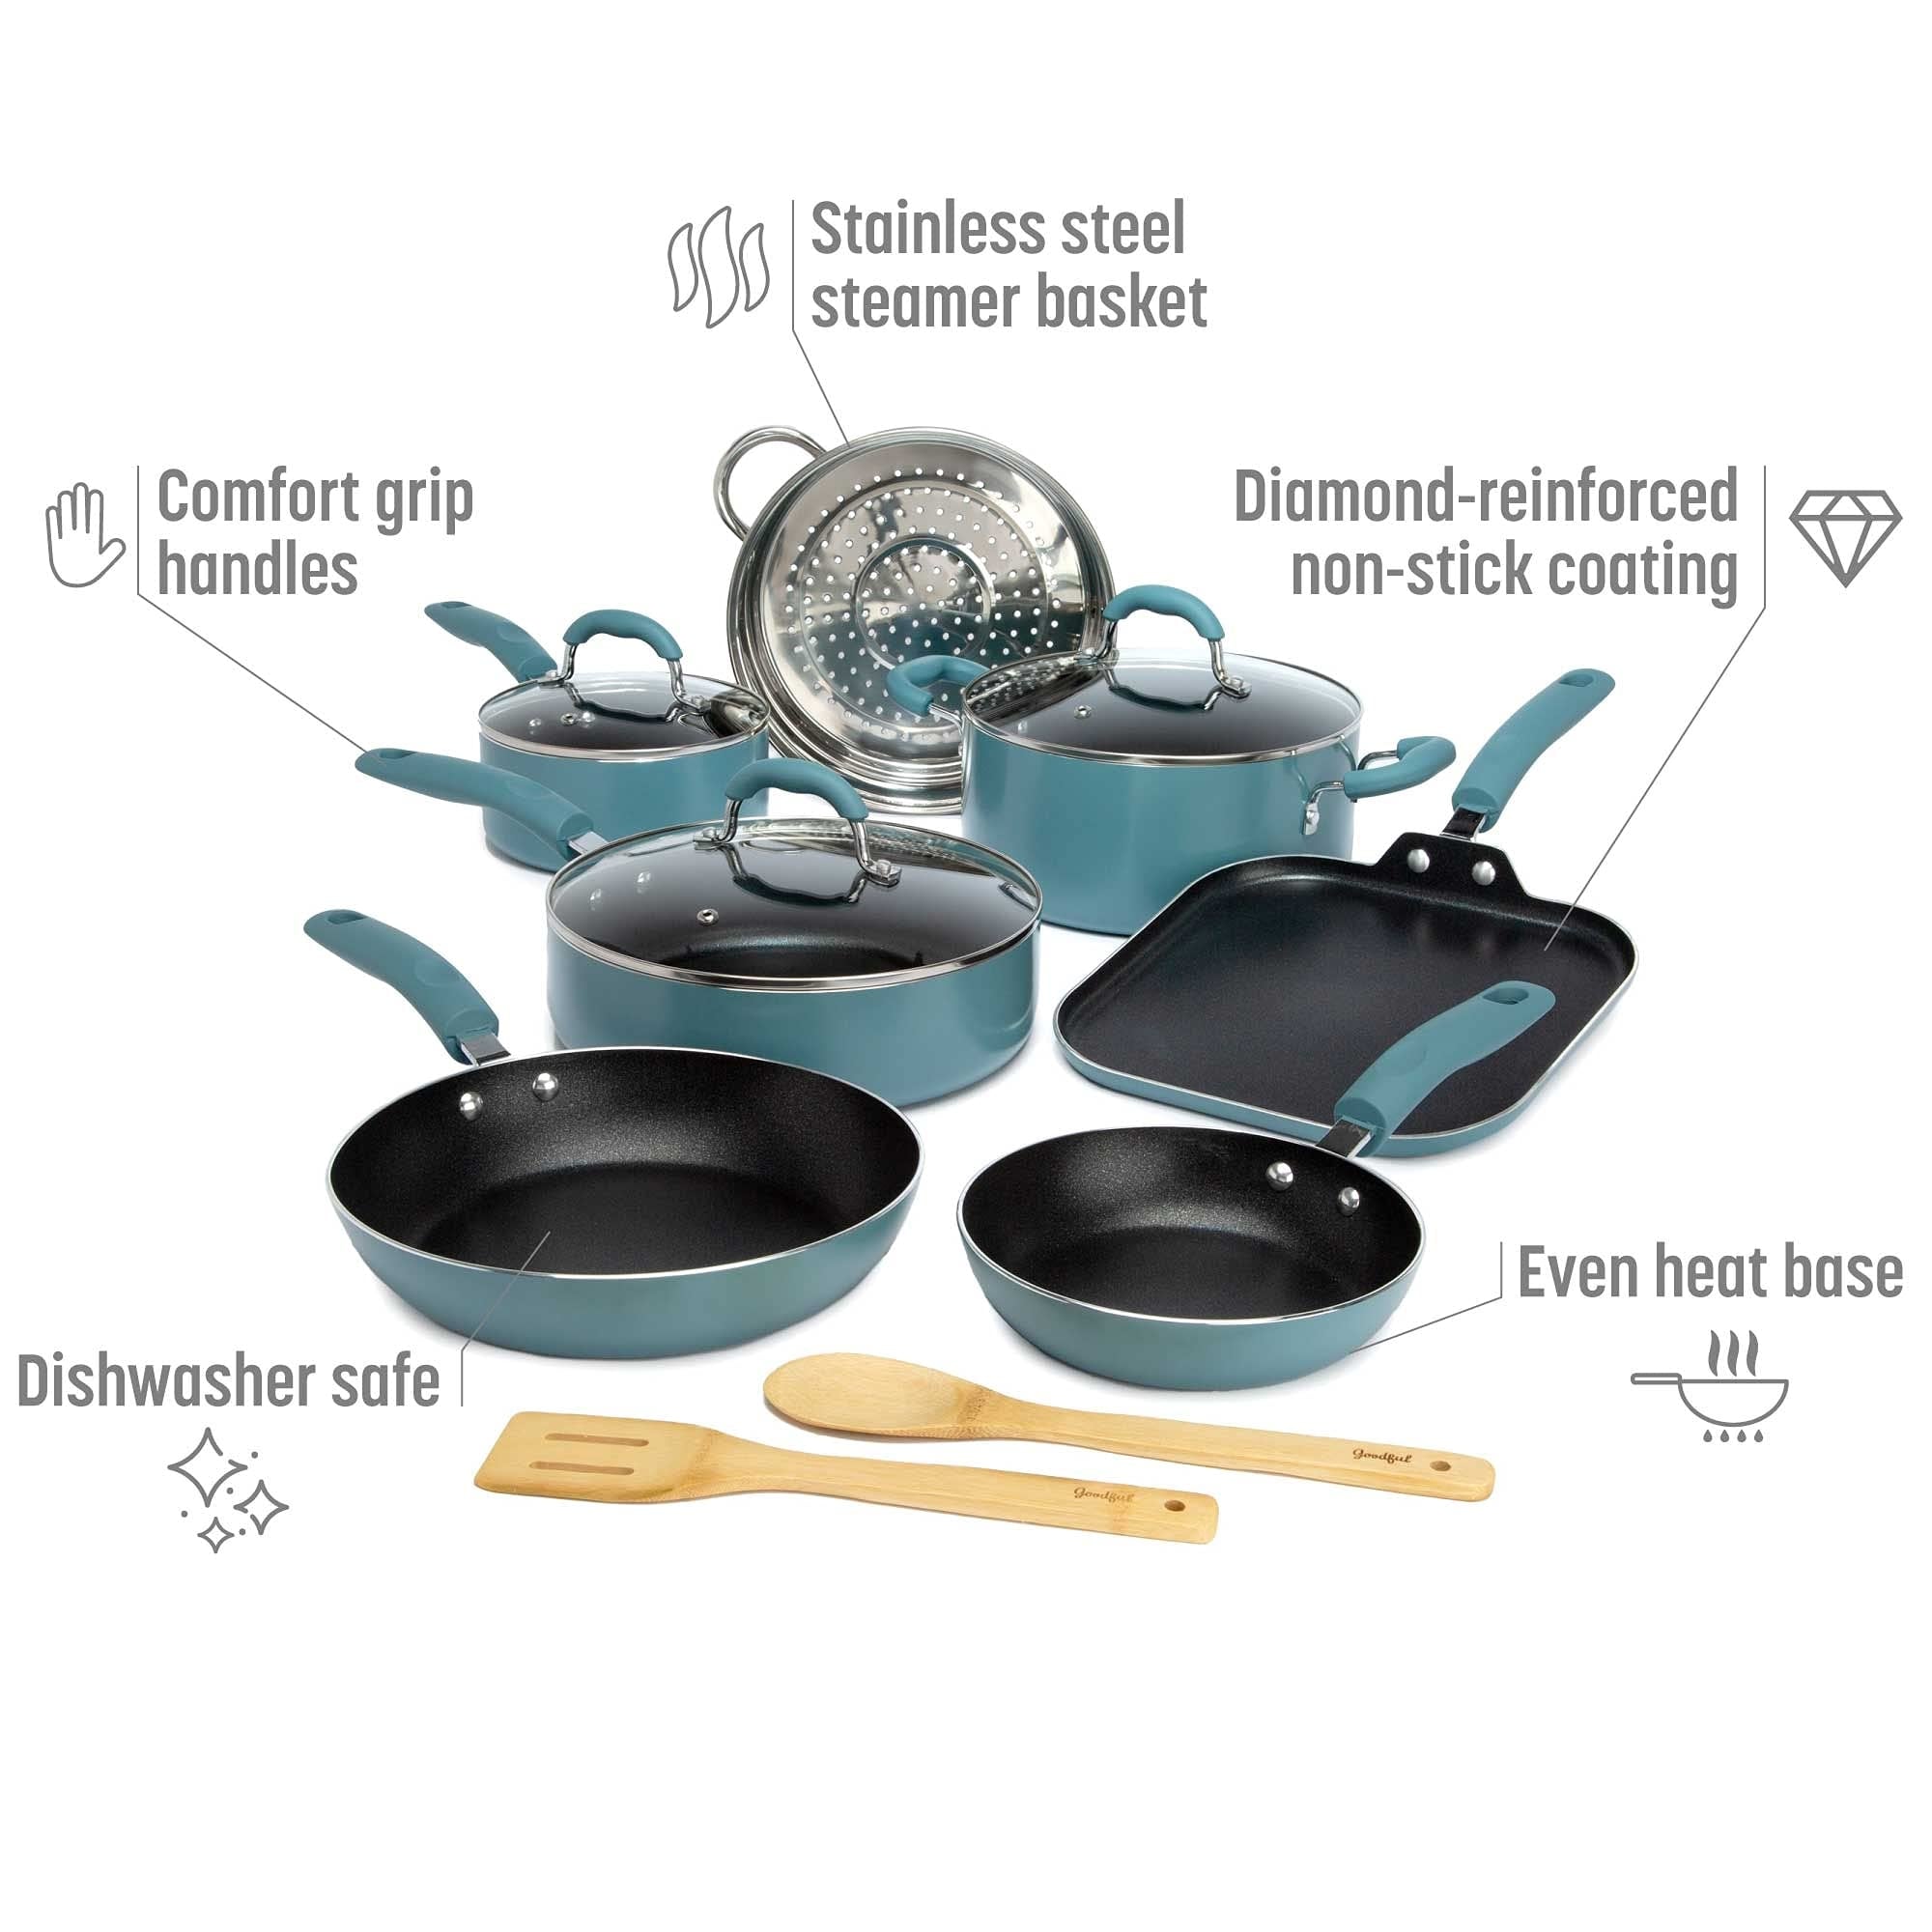 https://ak1.ostkcdn.com/images/products/is/images/direct/353a39056395260aaa522943d8bc4bbce3bd709b/Cookware-Set-with-Premium-Non-Stick-Coating%2C-Dishwasher-Safe-Pots-and-Pans%2C-Tempered-Glass-Steam-Vented-Lids%2C-12-Piece.jpg